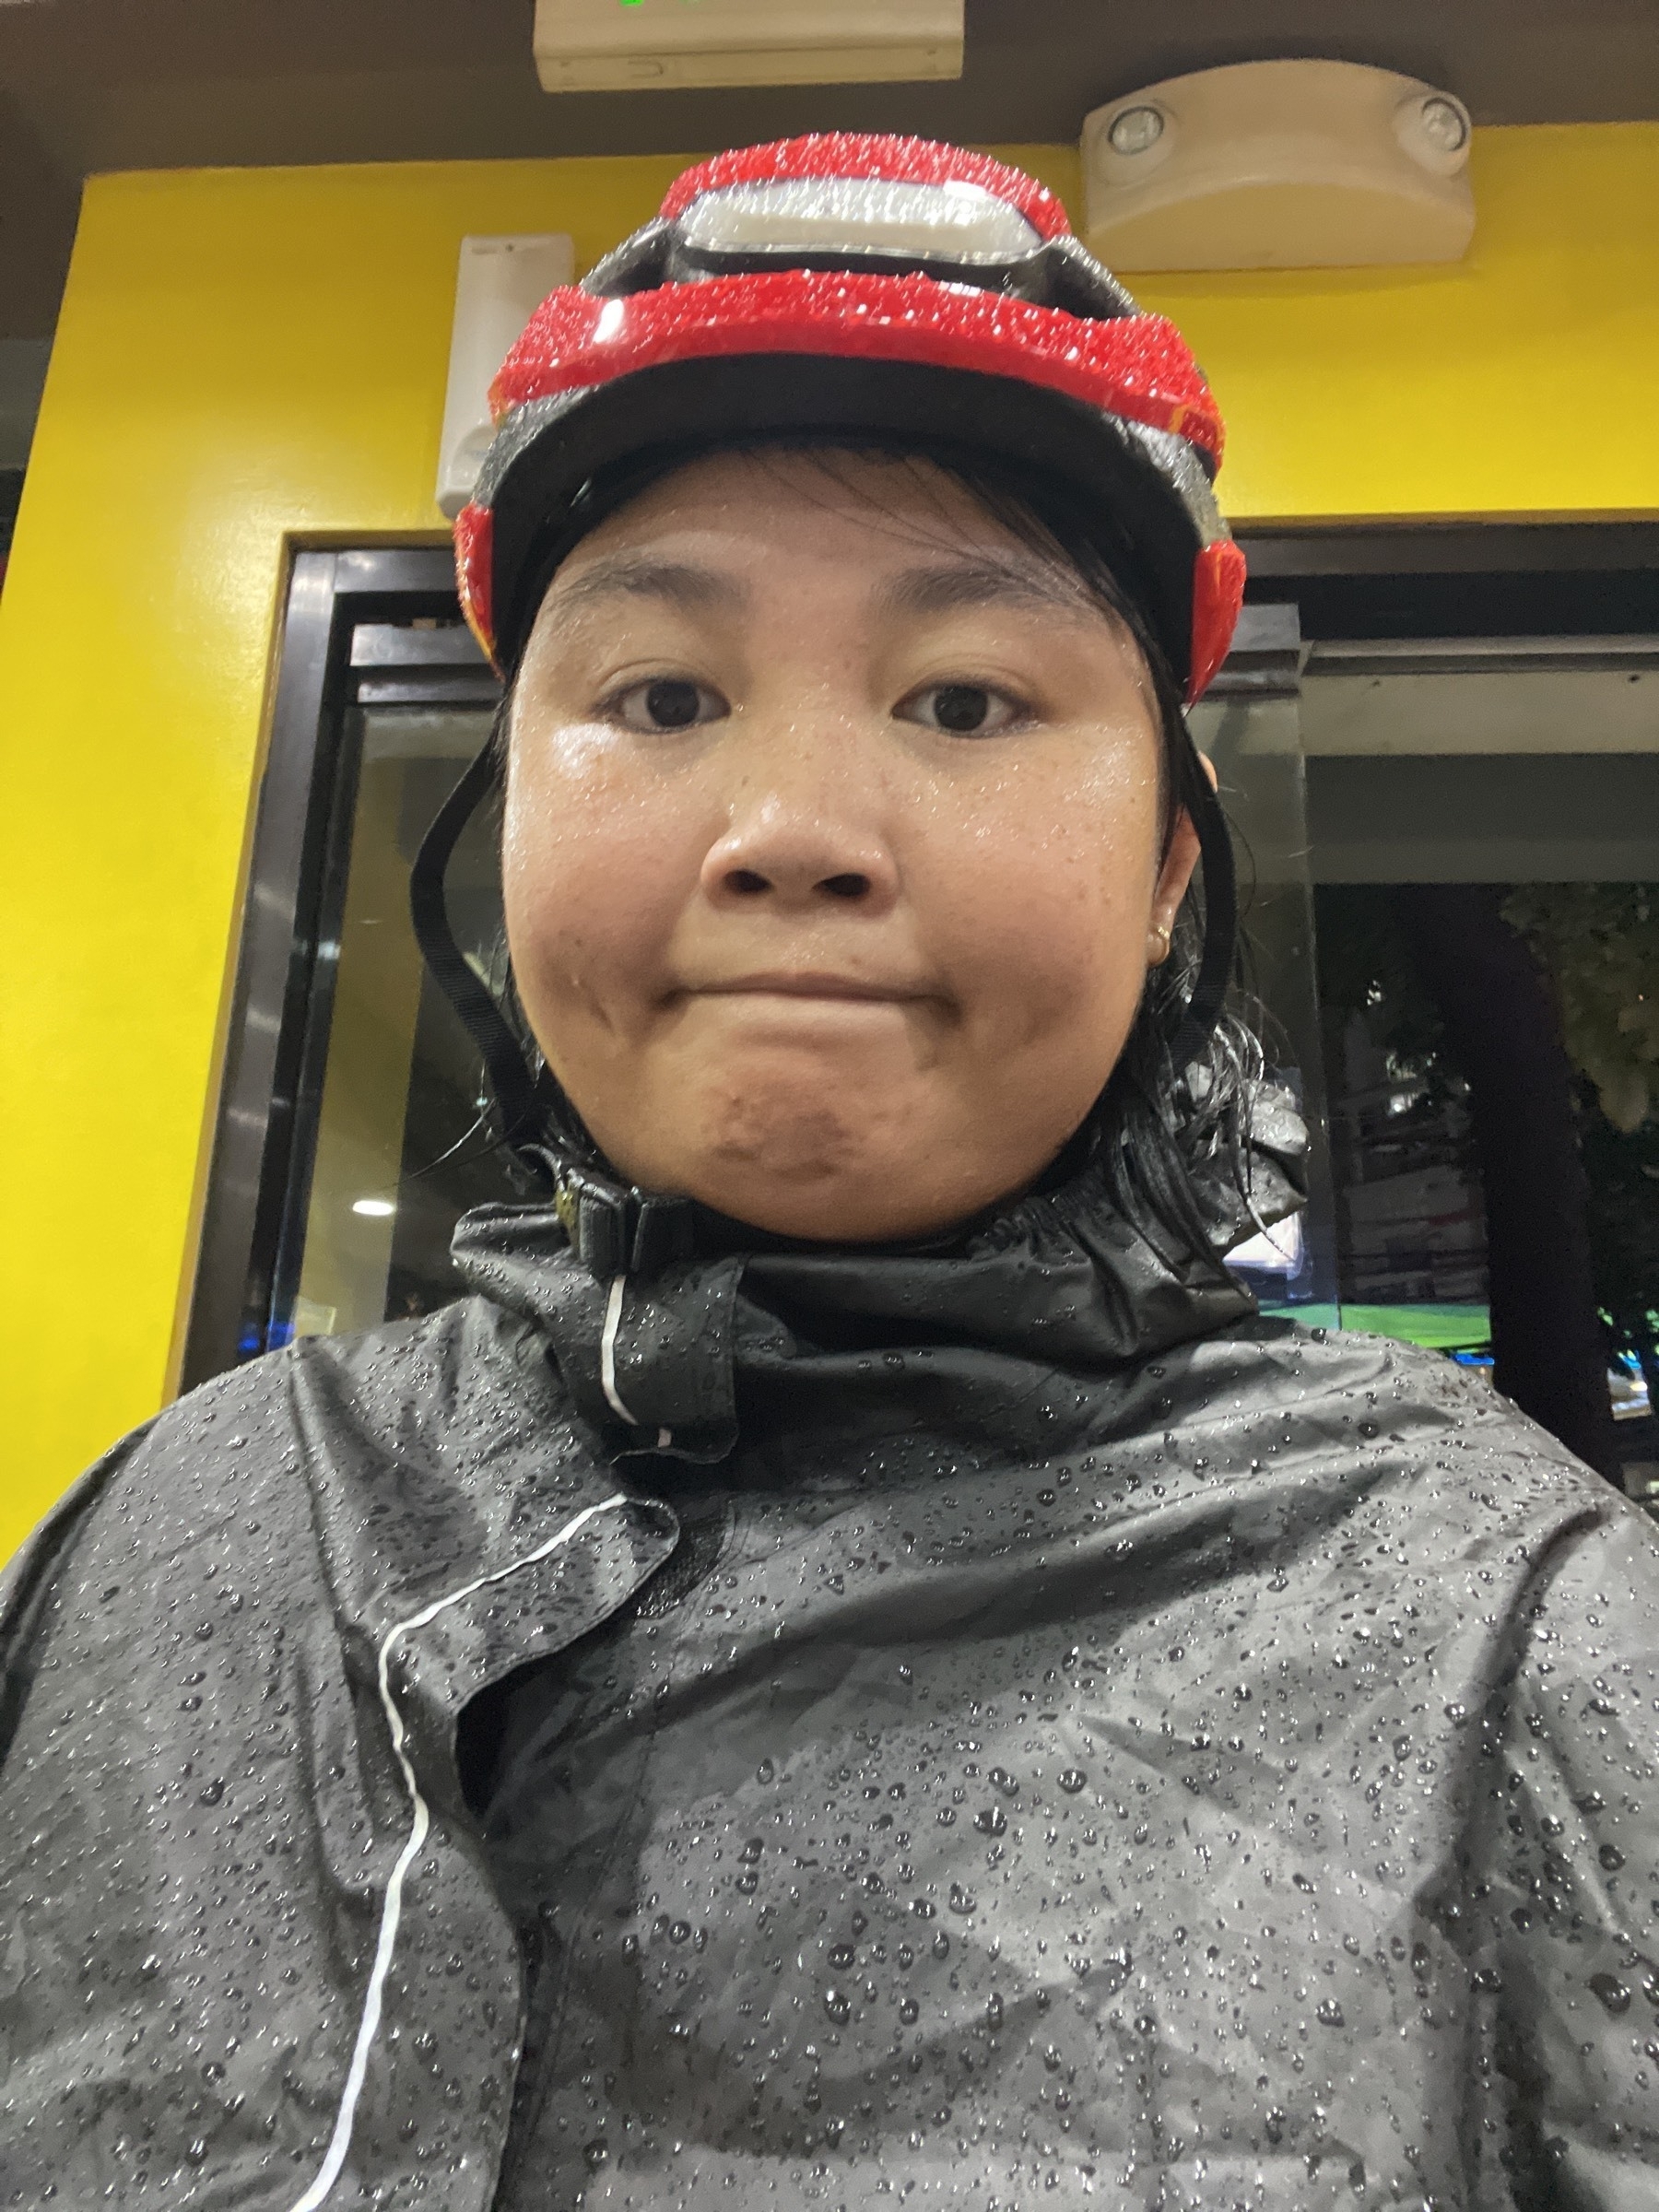 Selfie of Chi in her rain gear for her bike commute, wearing her red Lumos helmet and a black rain poncho. Both the poncho and her helmet are visibly drenched or have rain drops on them, and Chi's making a dejected or kind of exhausted face.